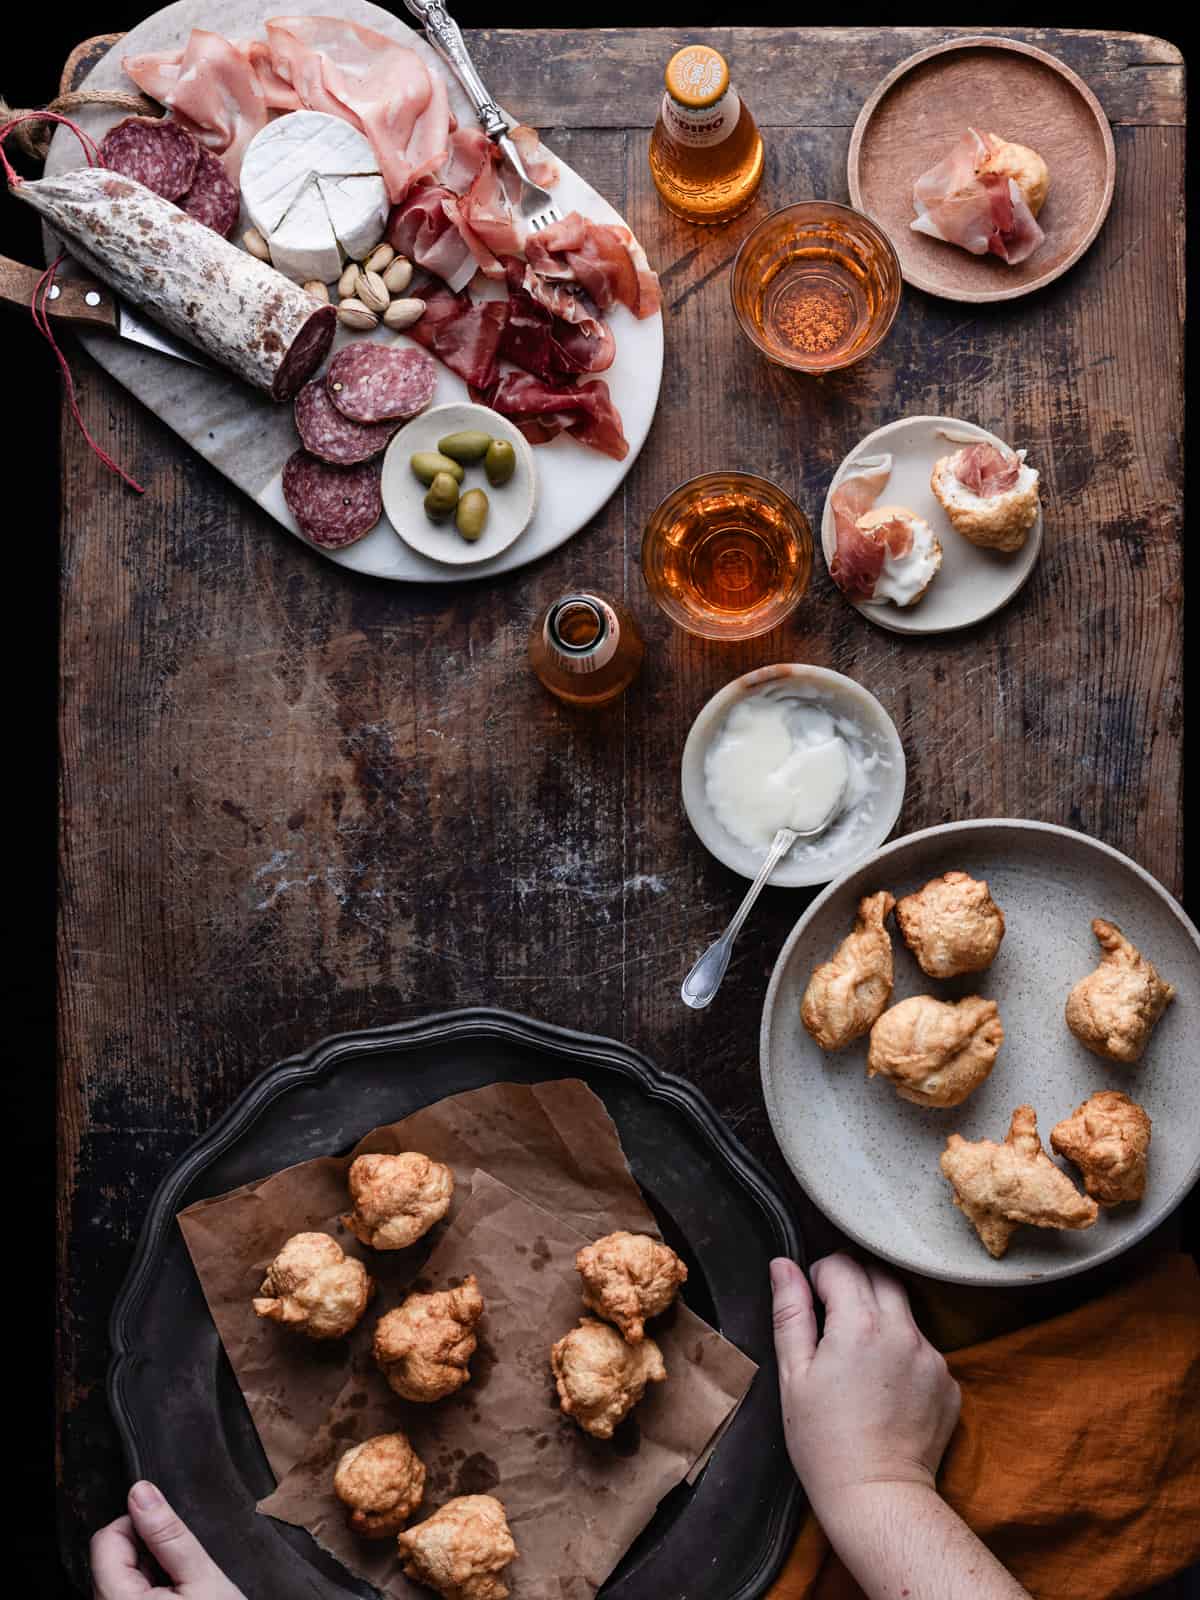 Fried coccoli on serving plate served on a table along with cheese and cured meats.